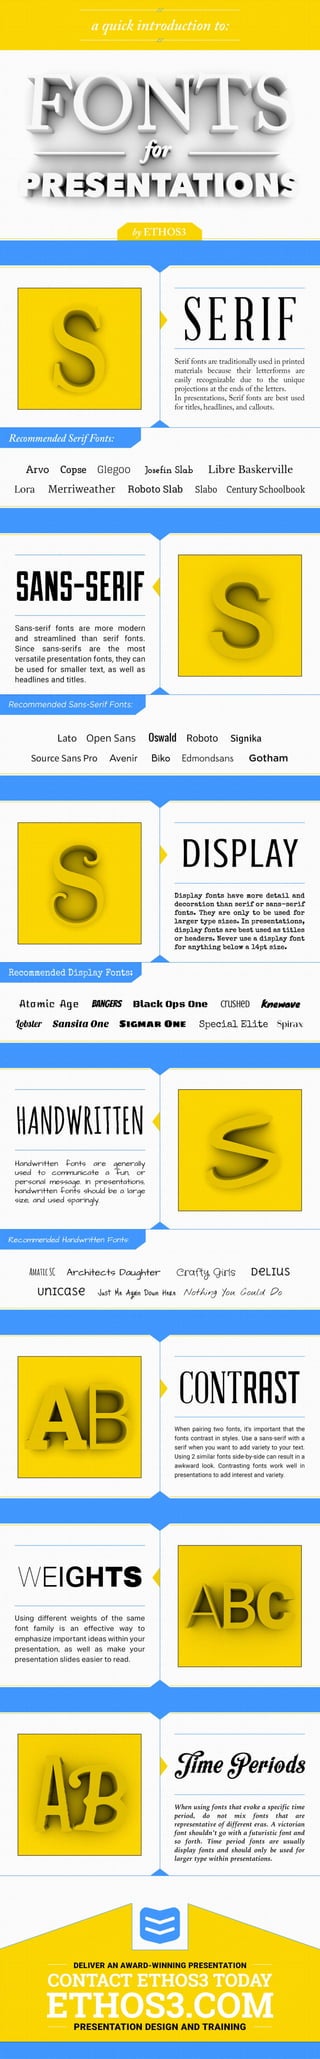 How To Choose Fonts For Presentation Designs